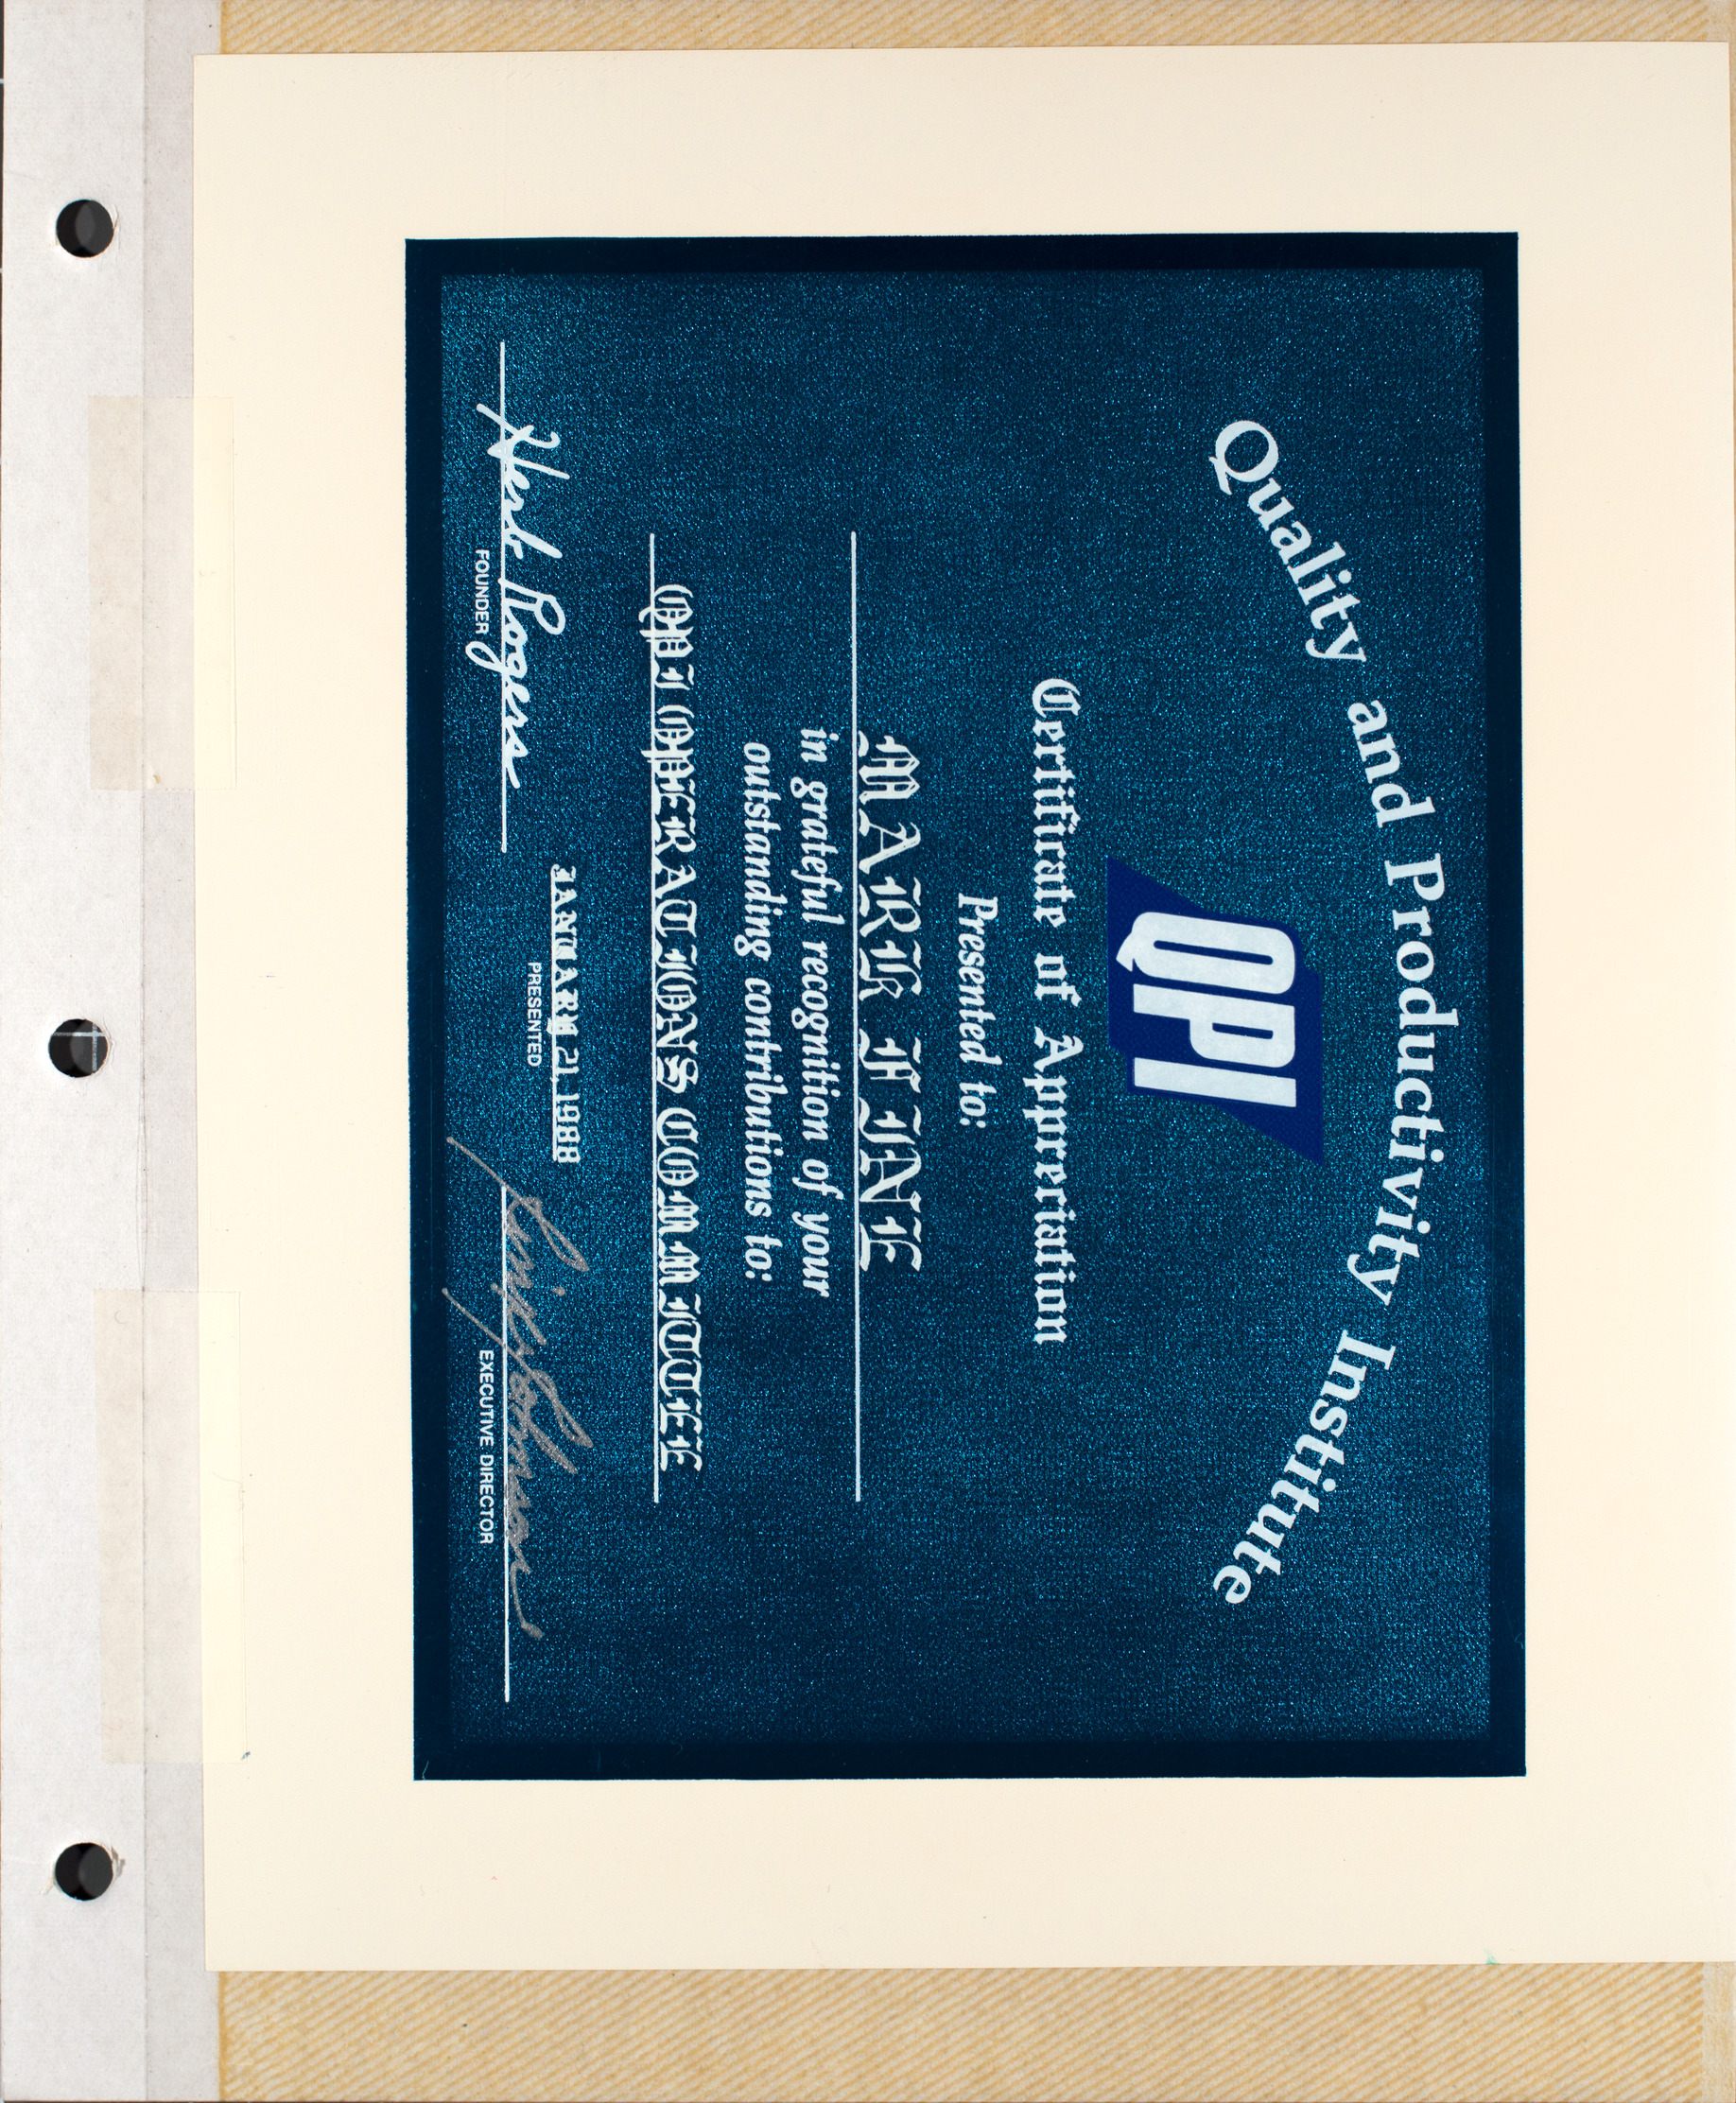 Certificate of appreciation for Mark Fine from the Quality and Productivity Institute, January 21, 1988